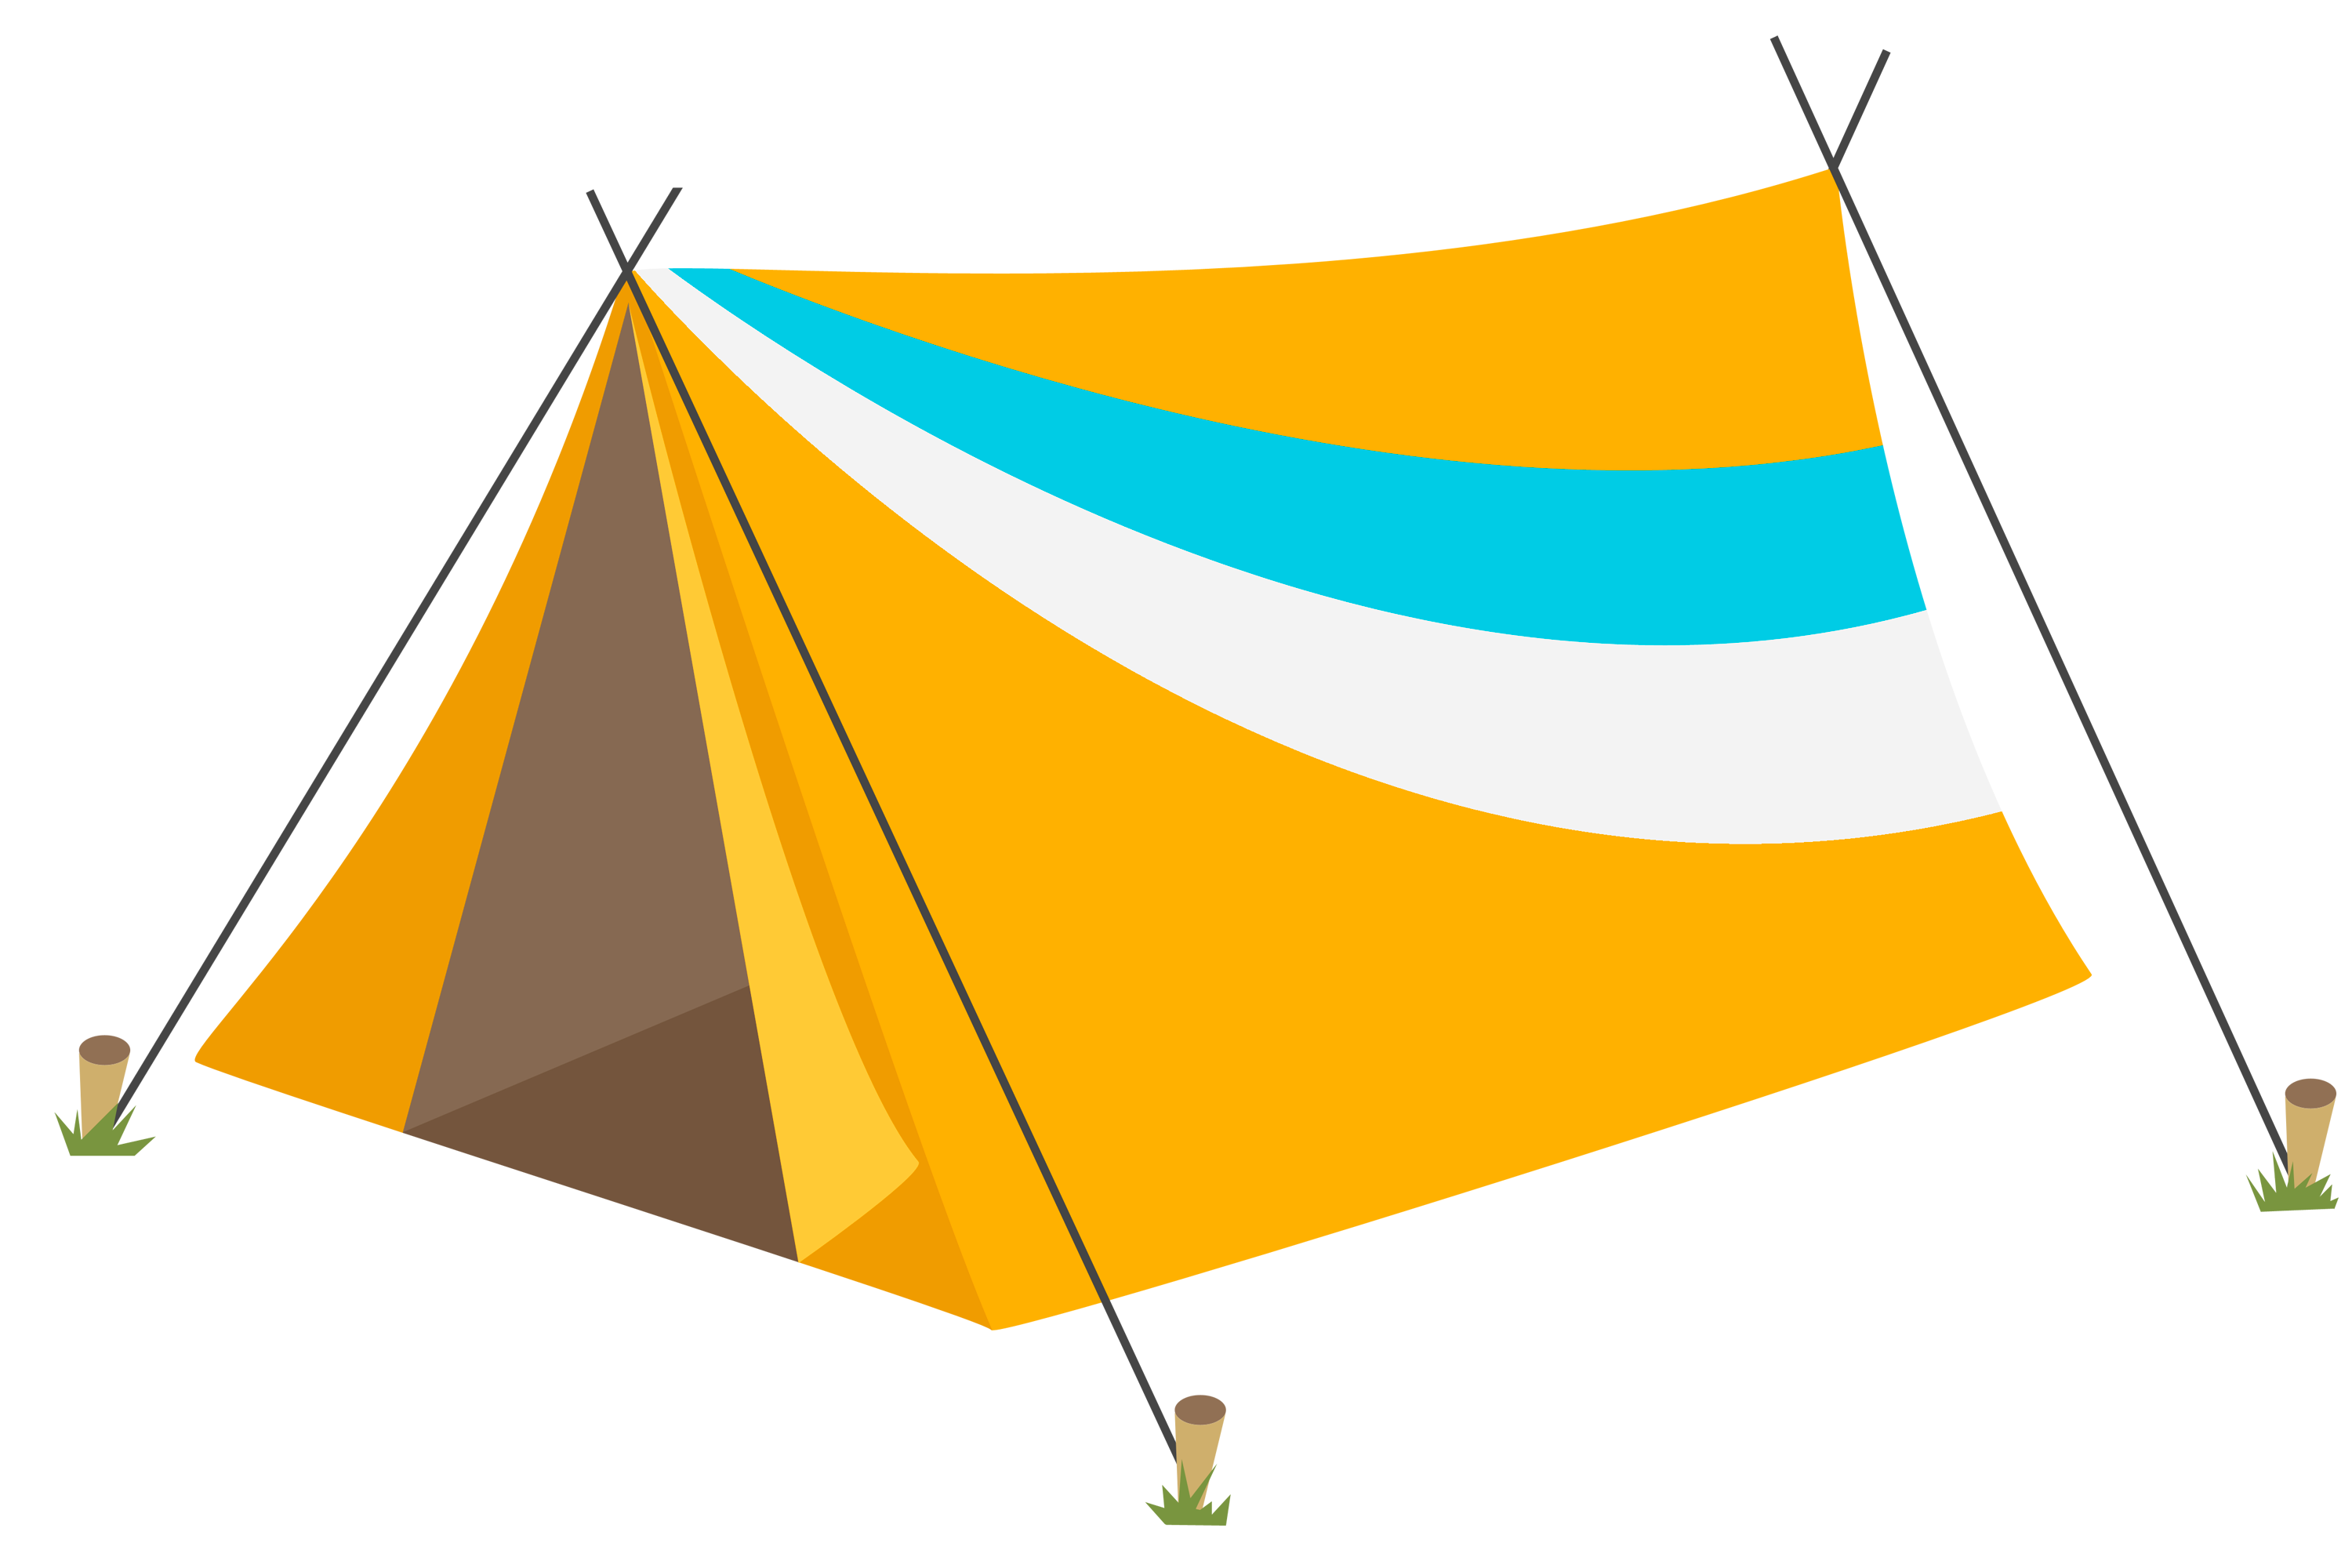 camp tents - Clip Art Library